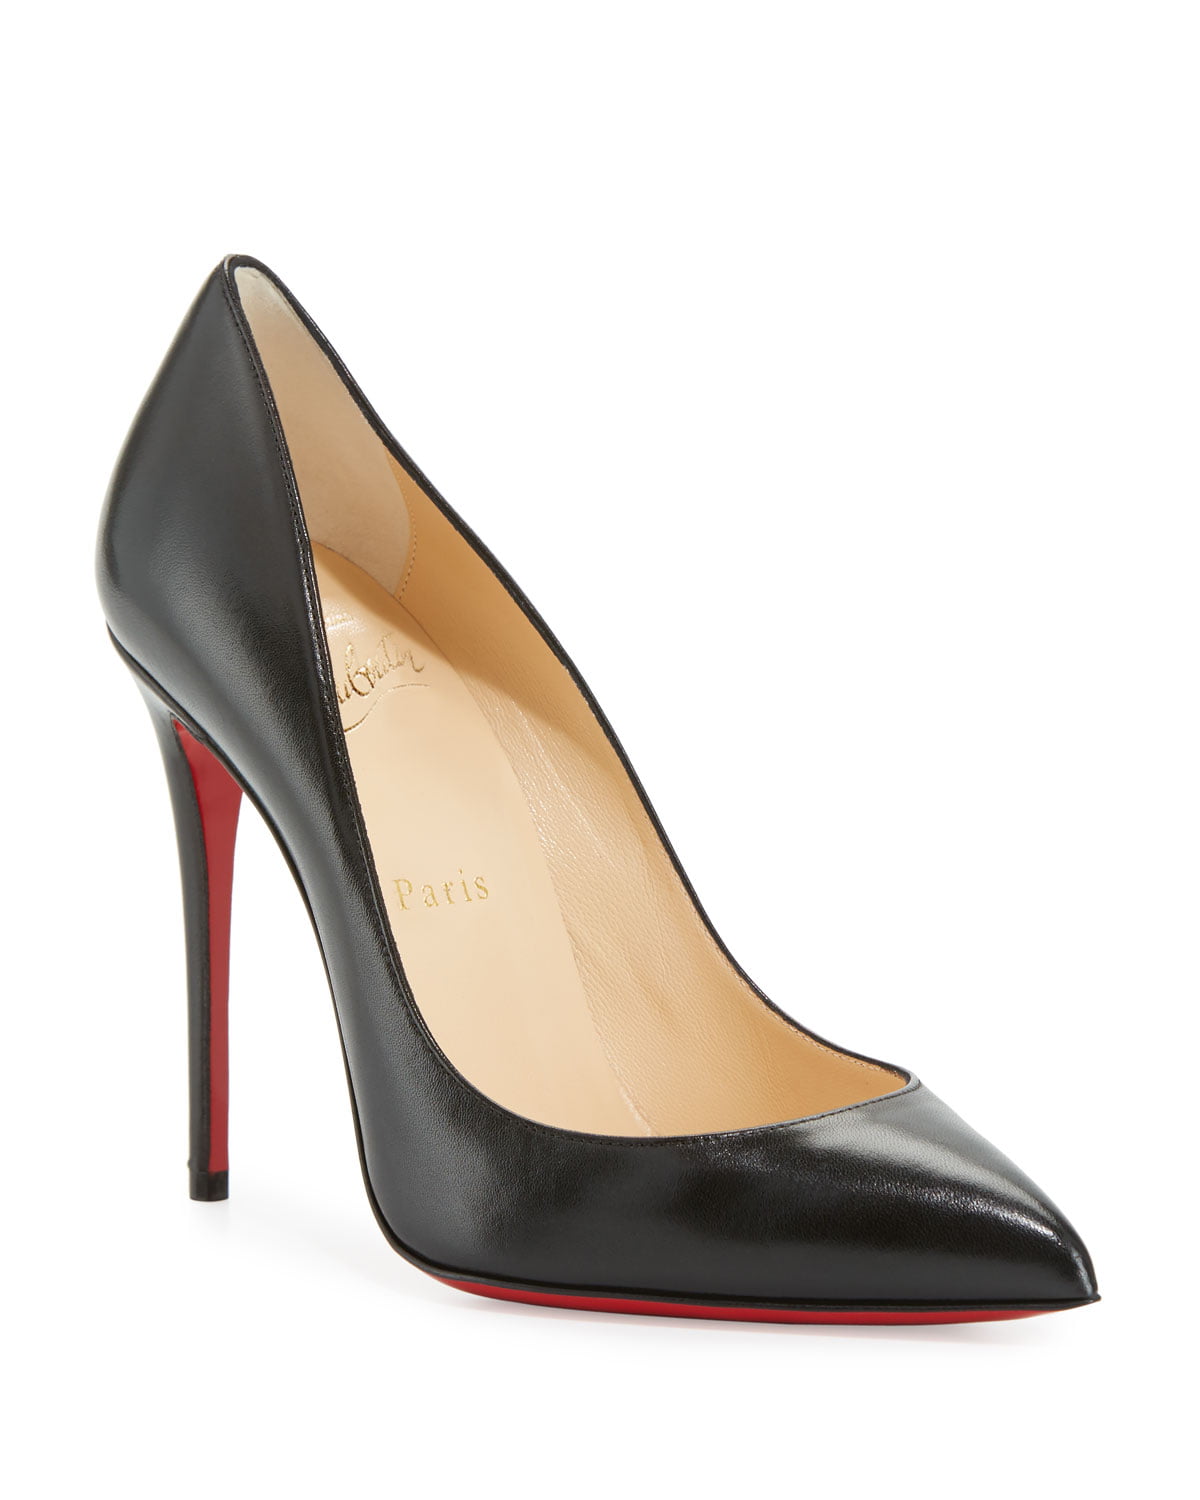 Christian Louboutin Pigalle Follies Leather 100mm Red Sole Pumps, Black